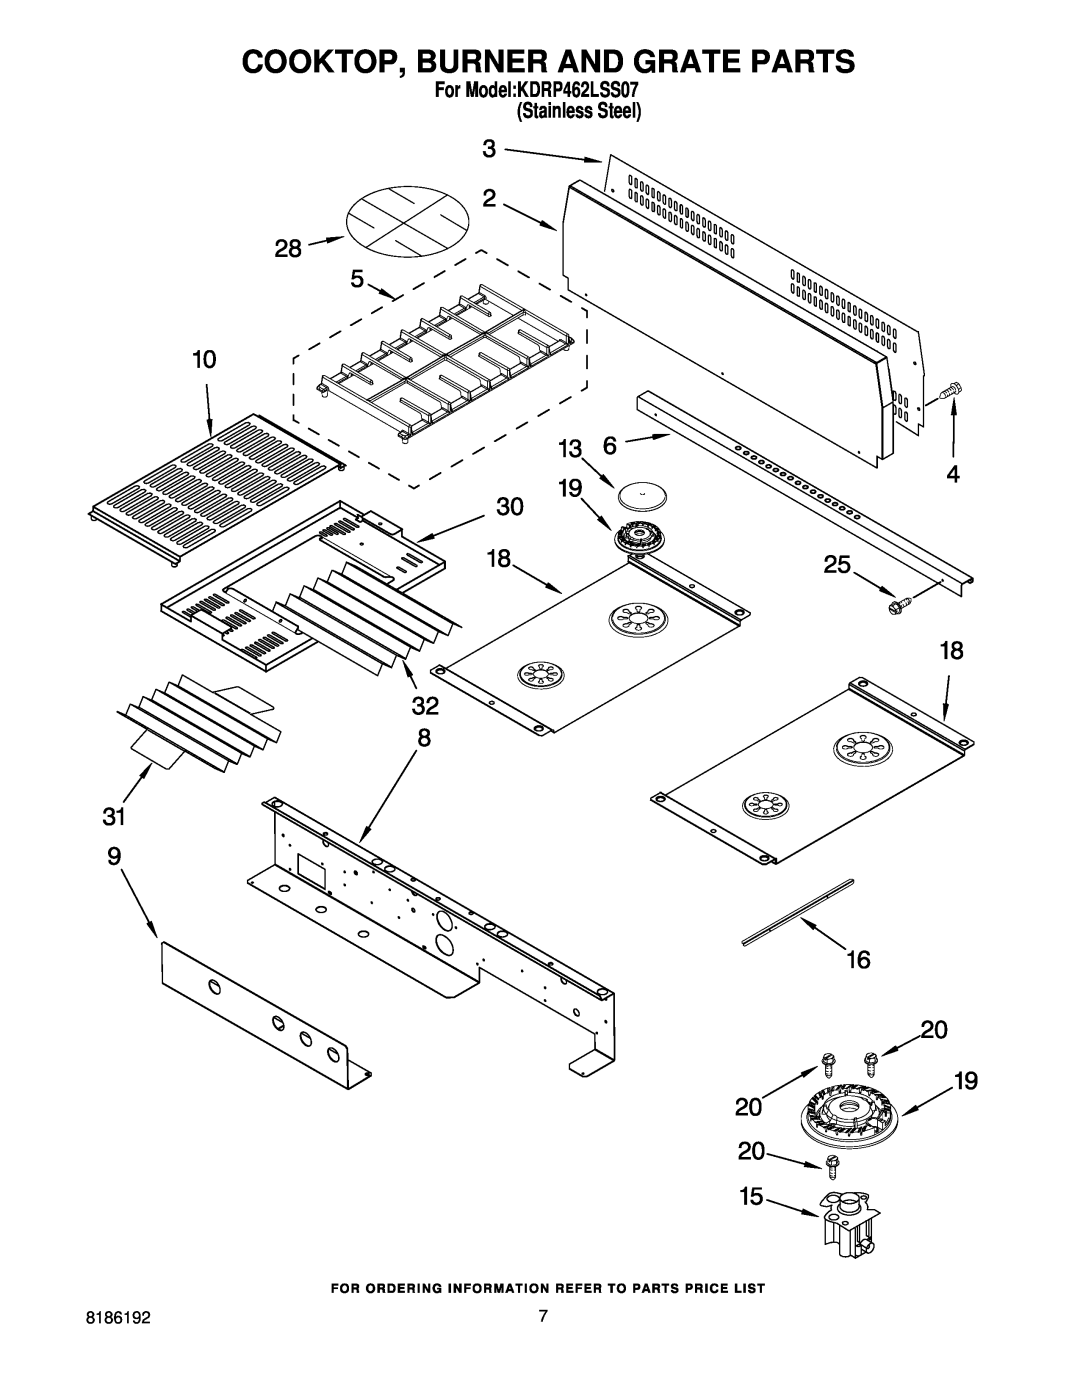 KitchenAid manual Cooktop, Burner And Grate Parts, For ModelKDRP462LSS07 Stainless Steel 